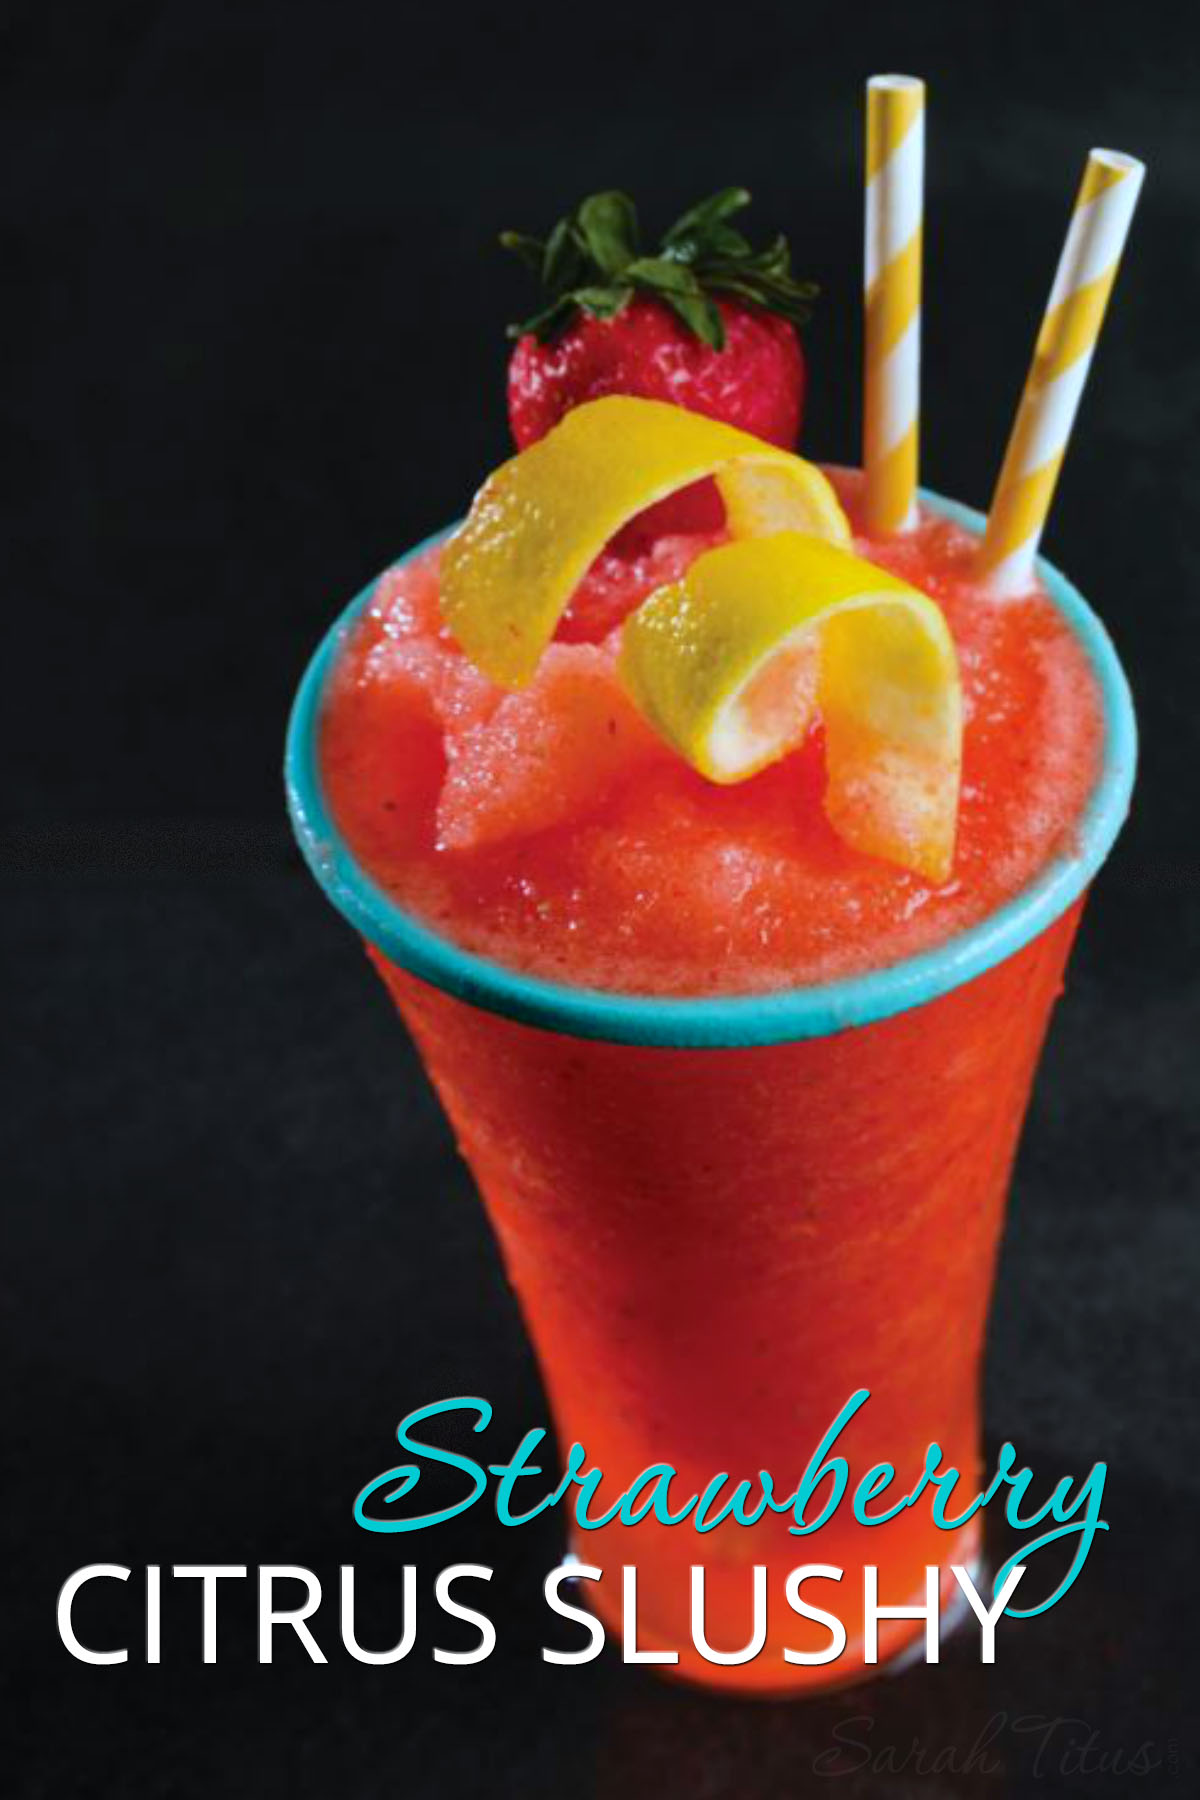 It's super hot outside and you feel like you're melting. Cool off with this delicious Strawberry Citrus Slushy!